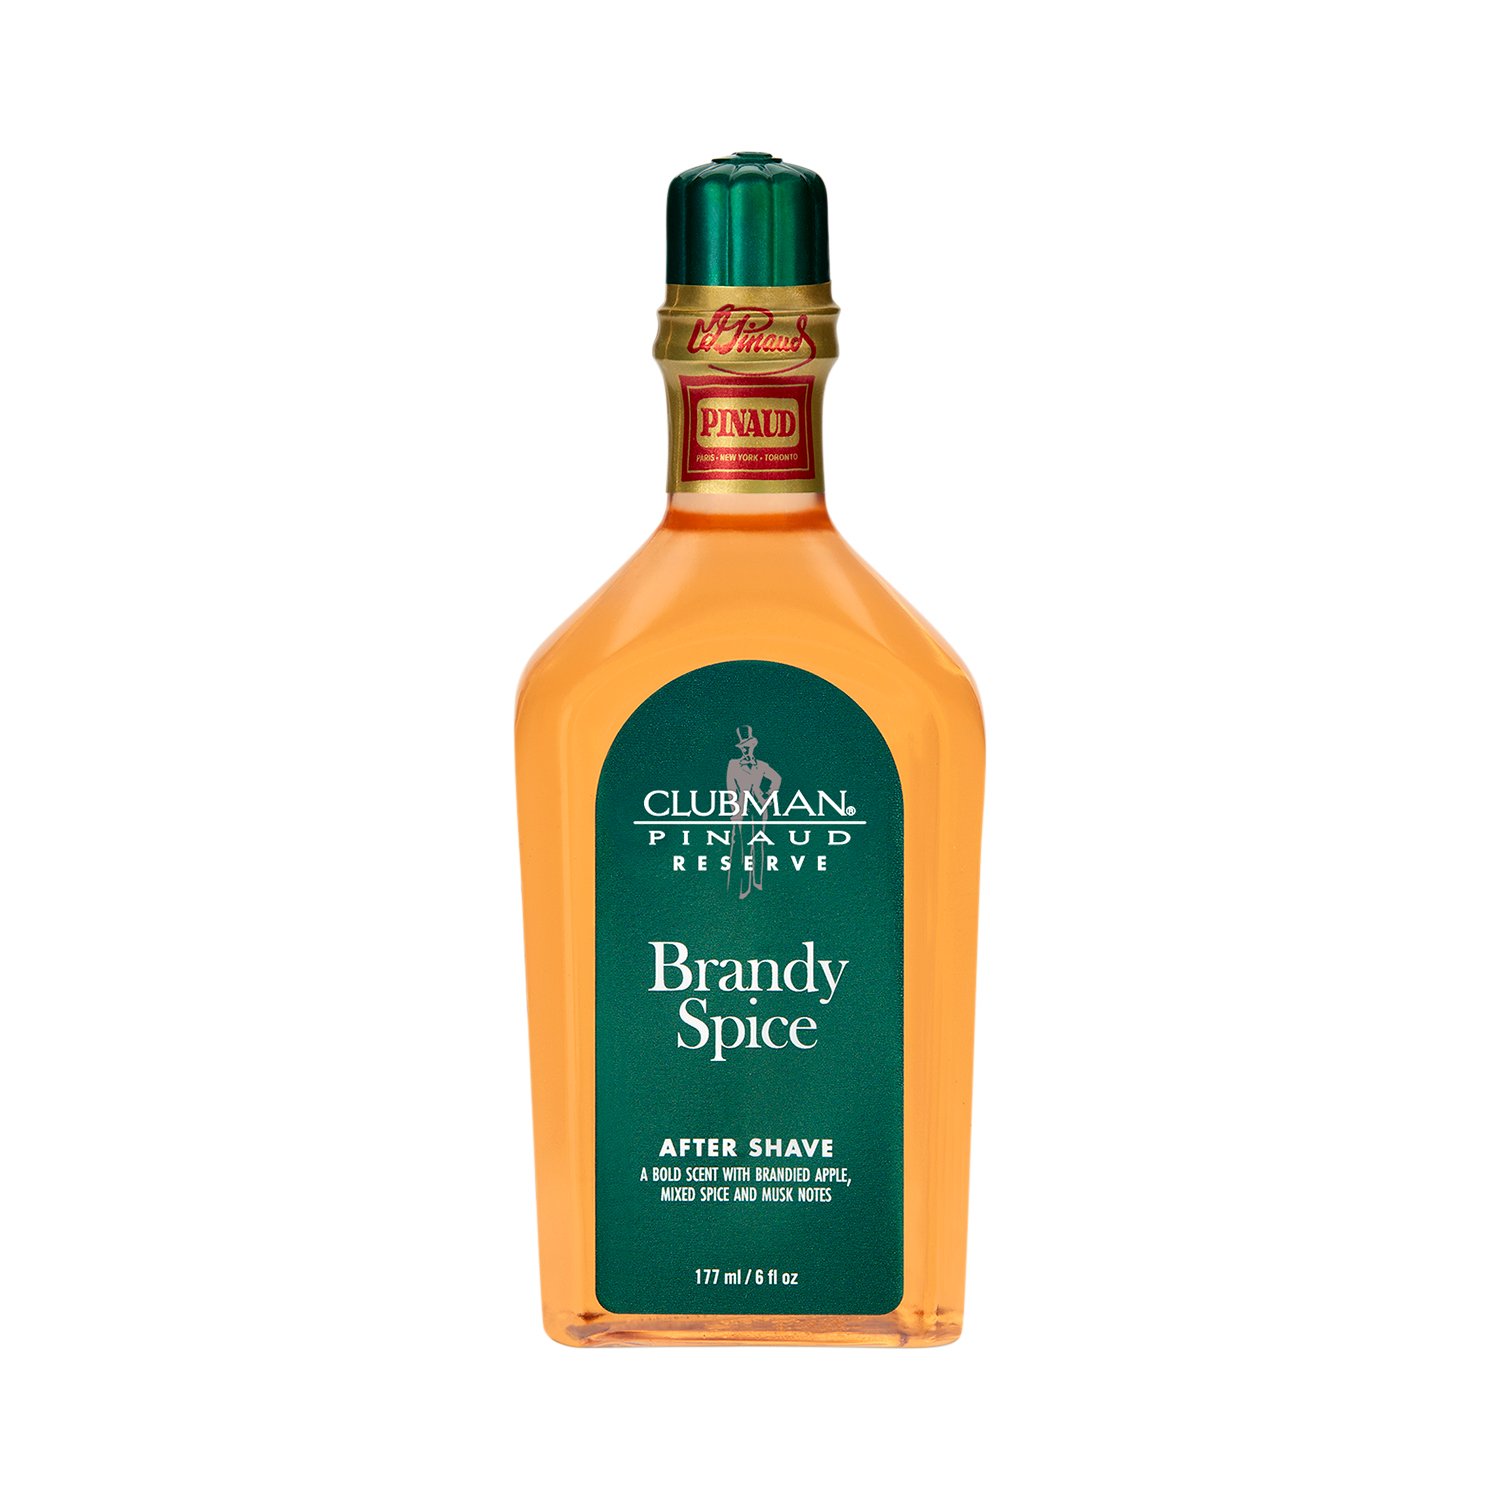 Clubman Pinaud - Reserve - Brandy Spice After Shave Lotion